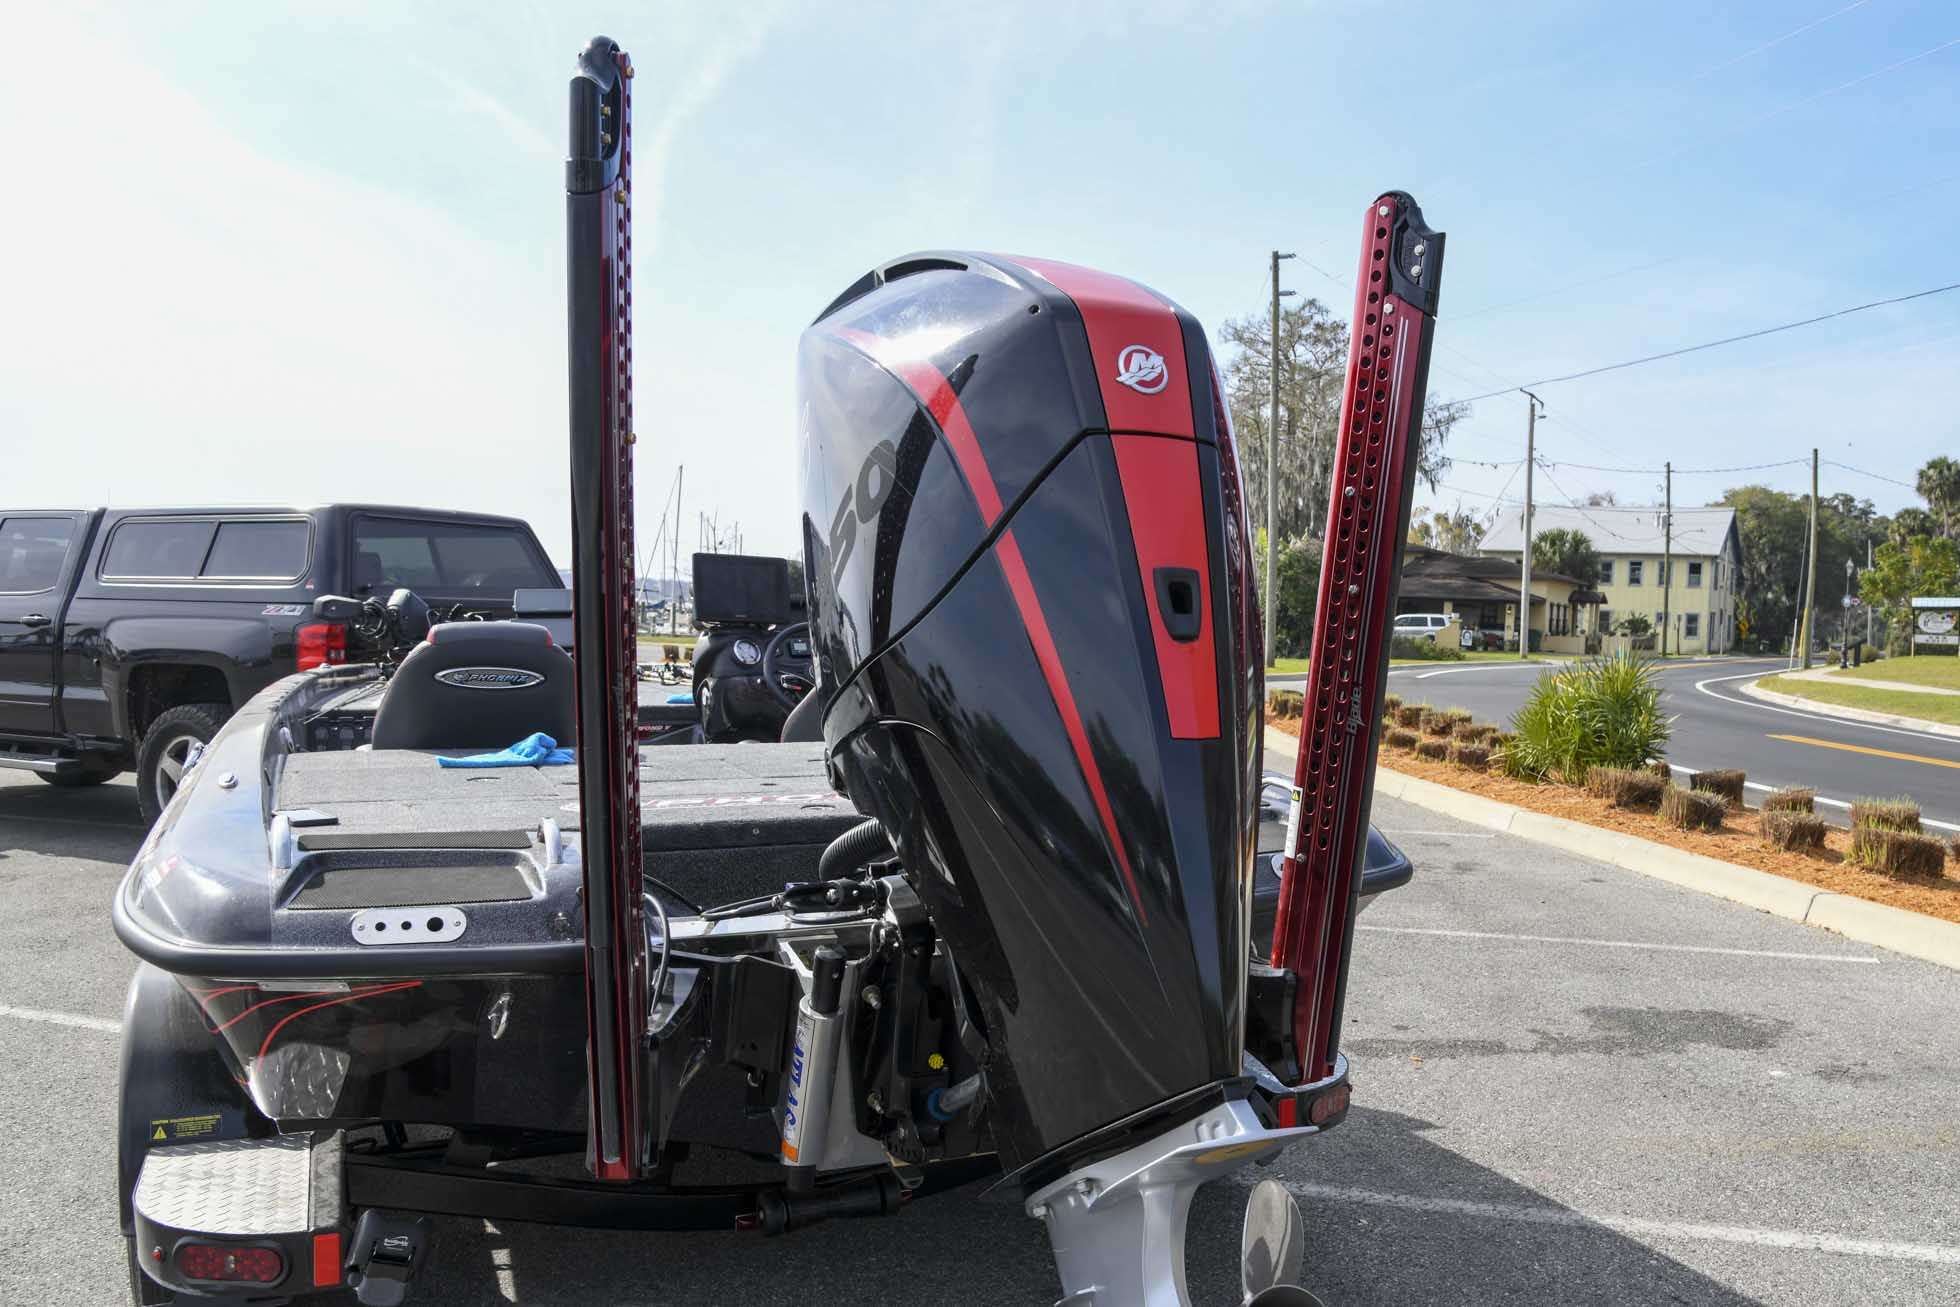 The outboard is flanked by a pair of Power-Poles that allow Mullins to hold his boat securely in place when sight fishing or really picking an area over.